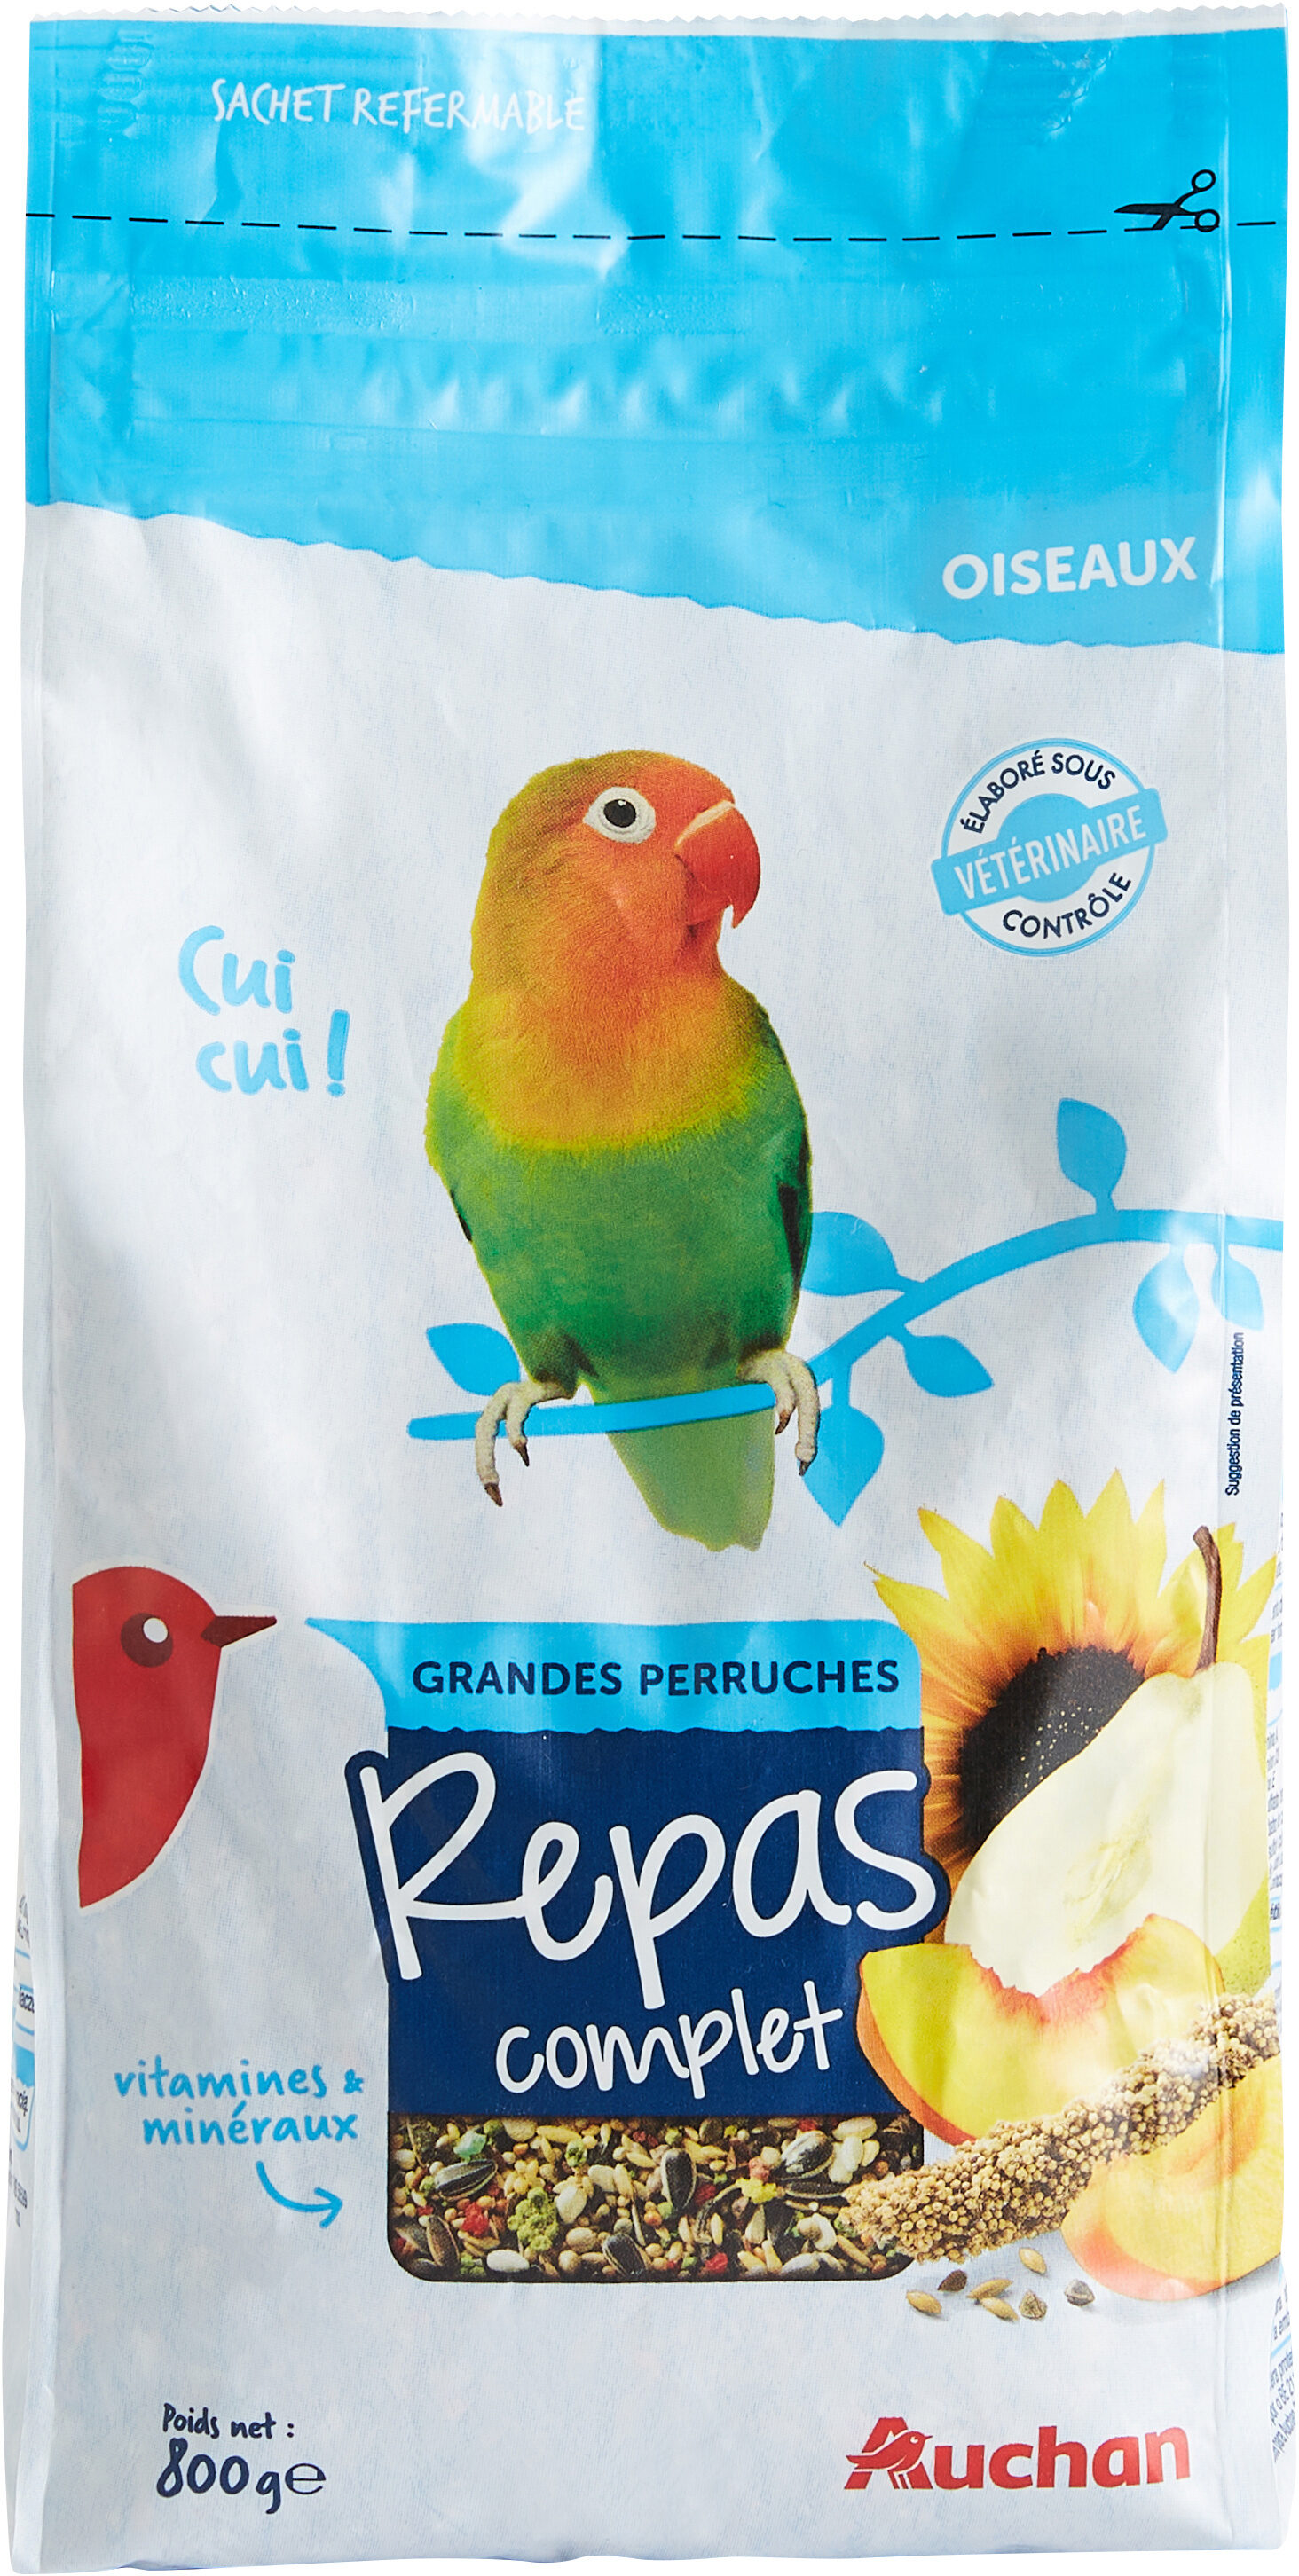 Grandes perruches repas complet - Product - fr